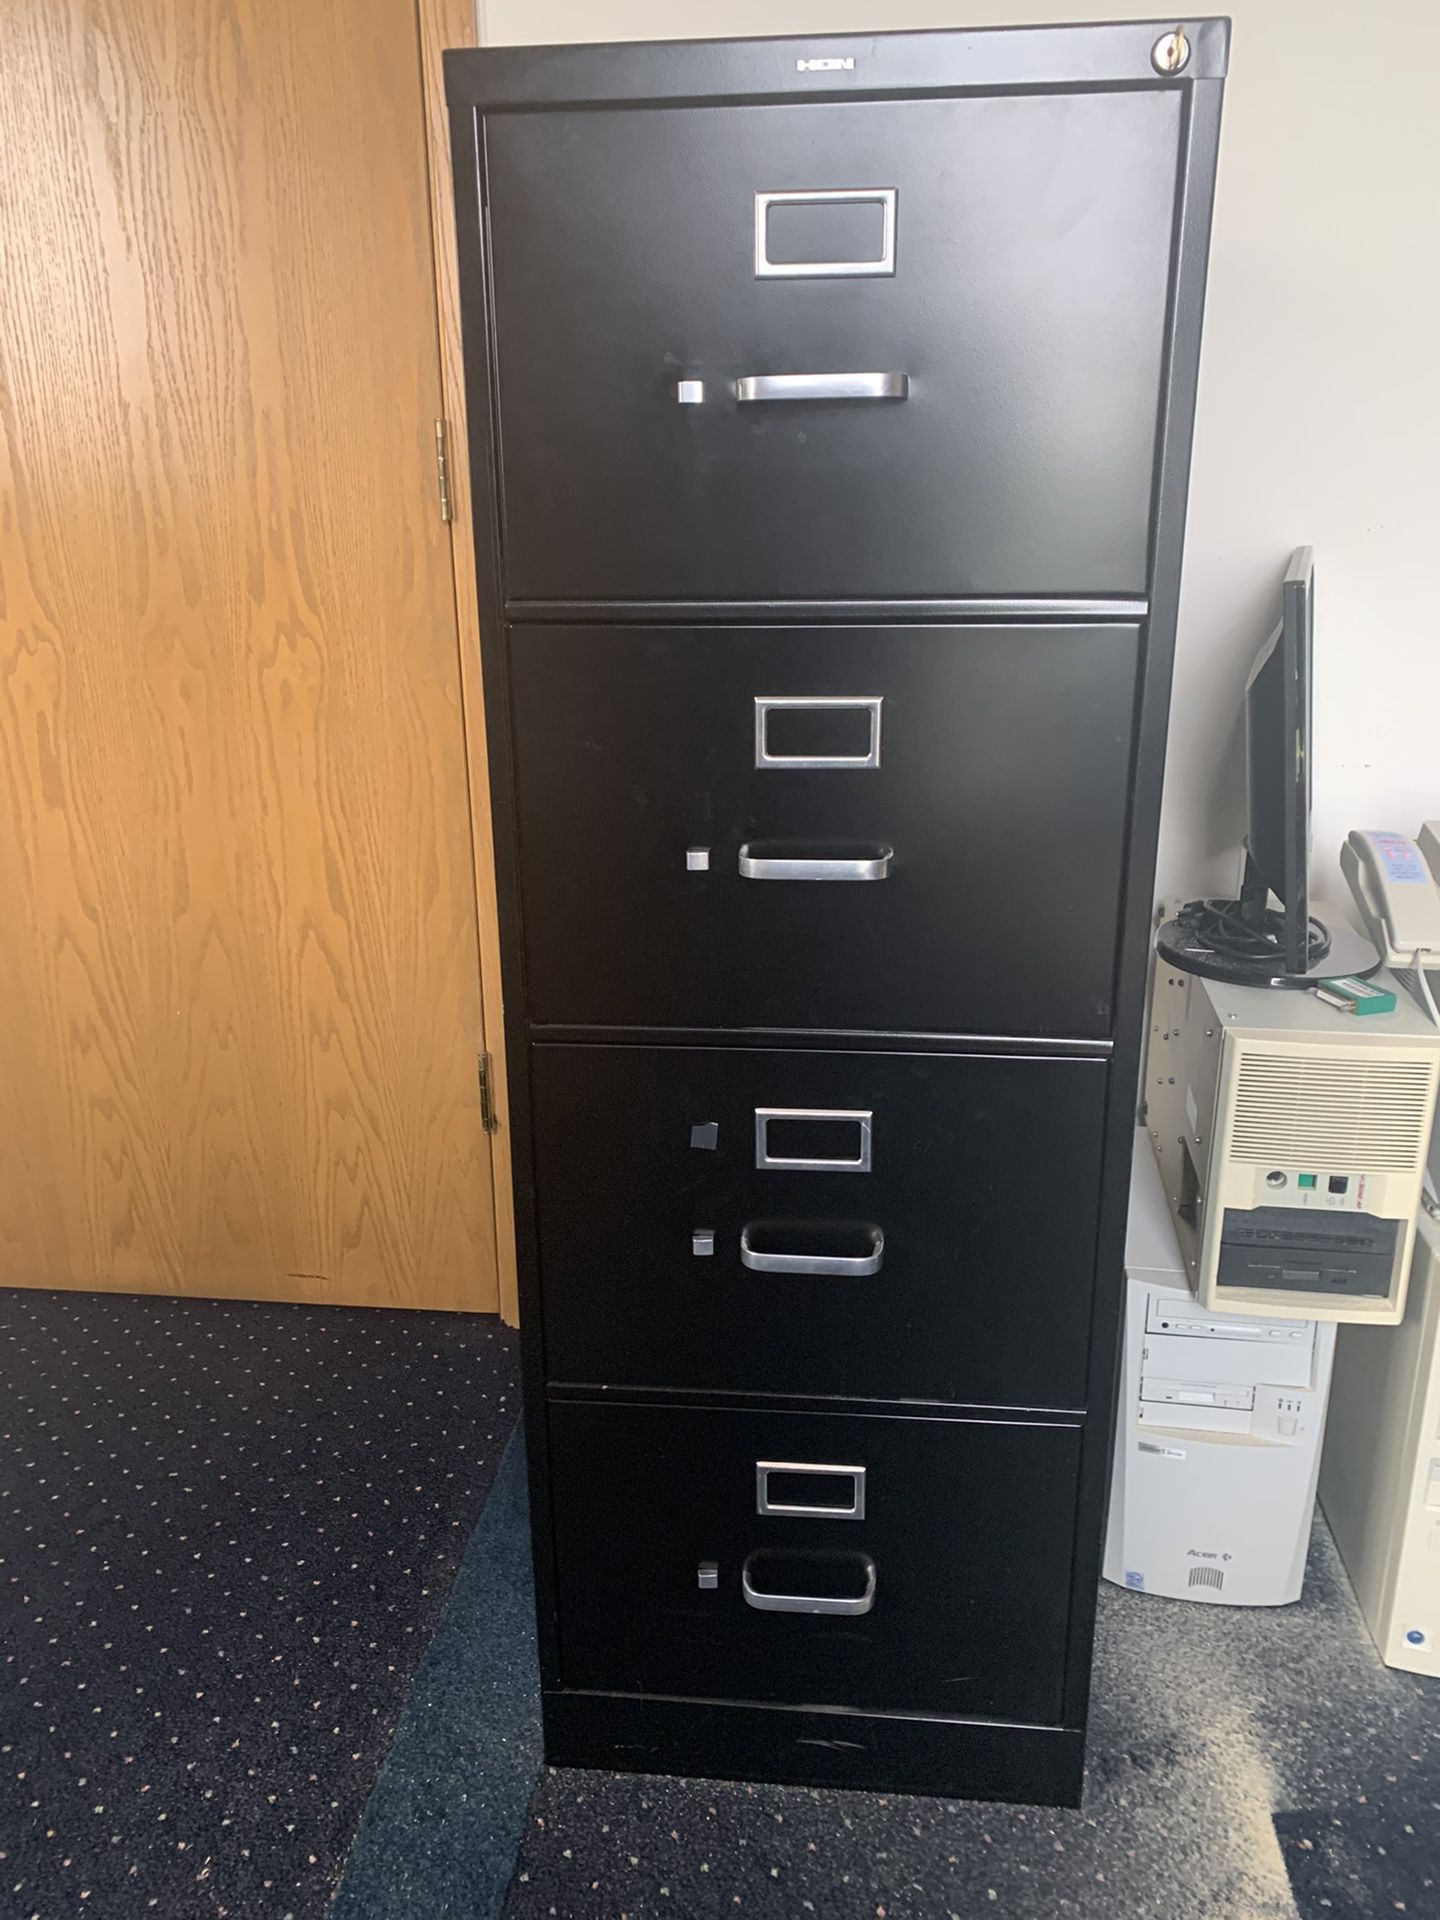 Hon brand legal file cabinet with key lock